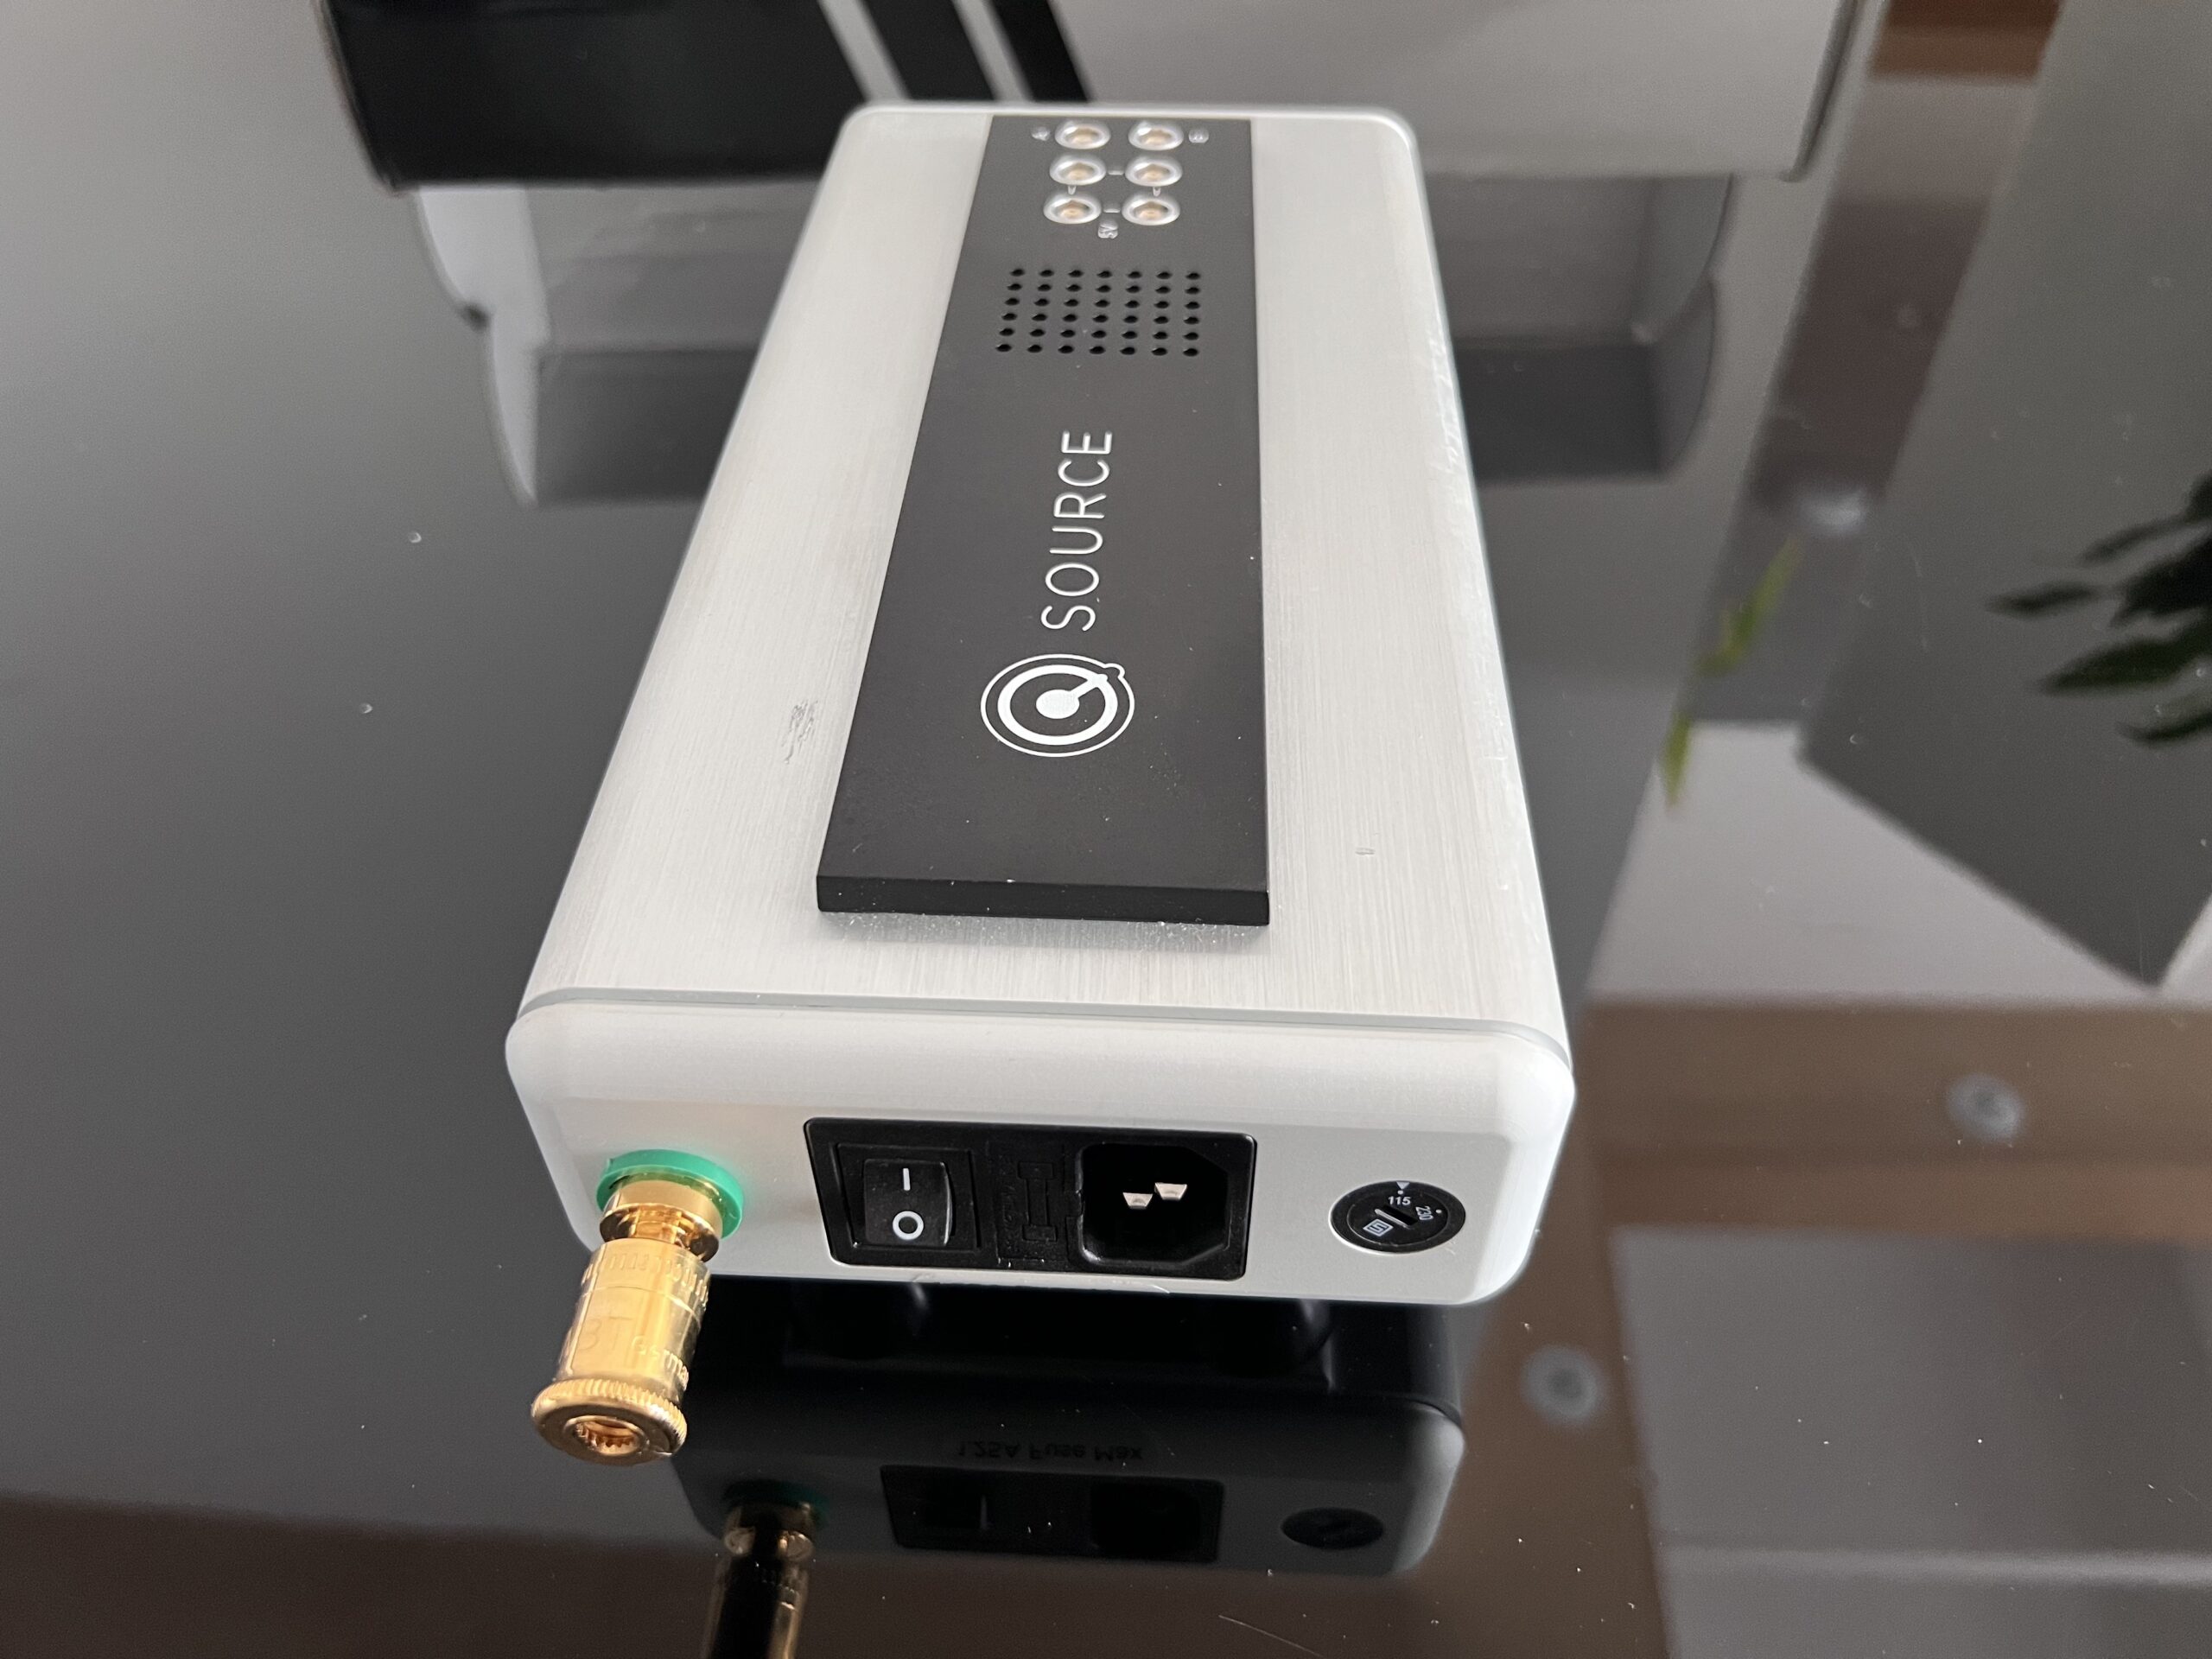 Nordost QSource Linear Power Supply is designed to improve a sound system's sonic articulation, heightening dynamics, and expanding the sound stage.